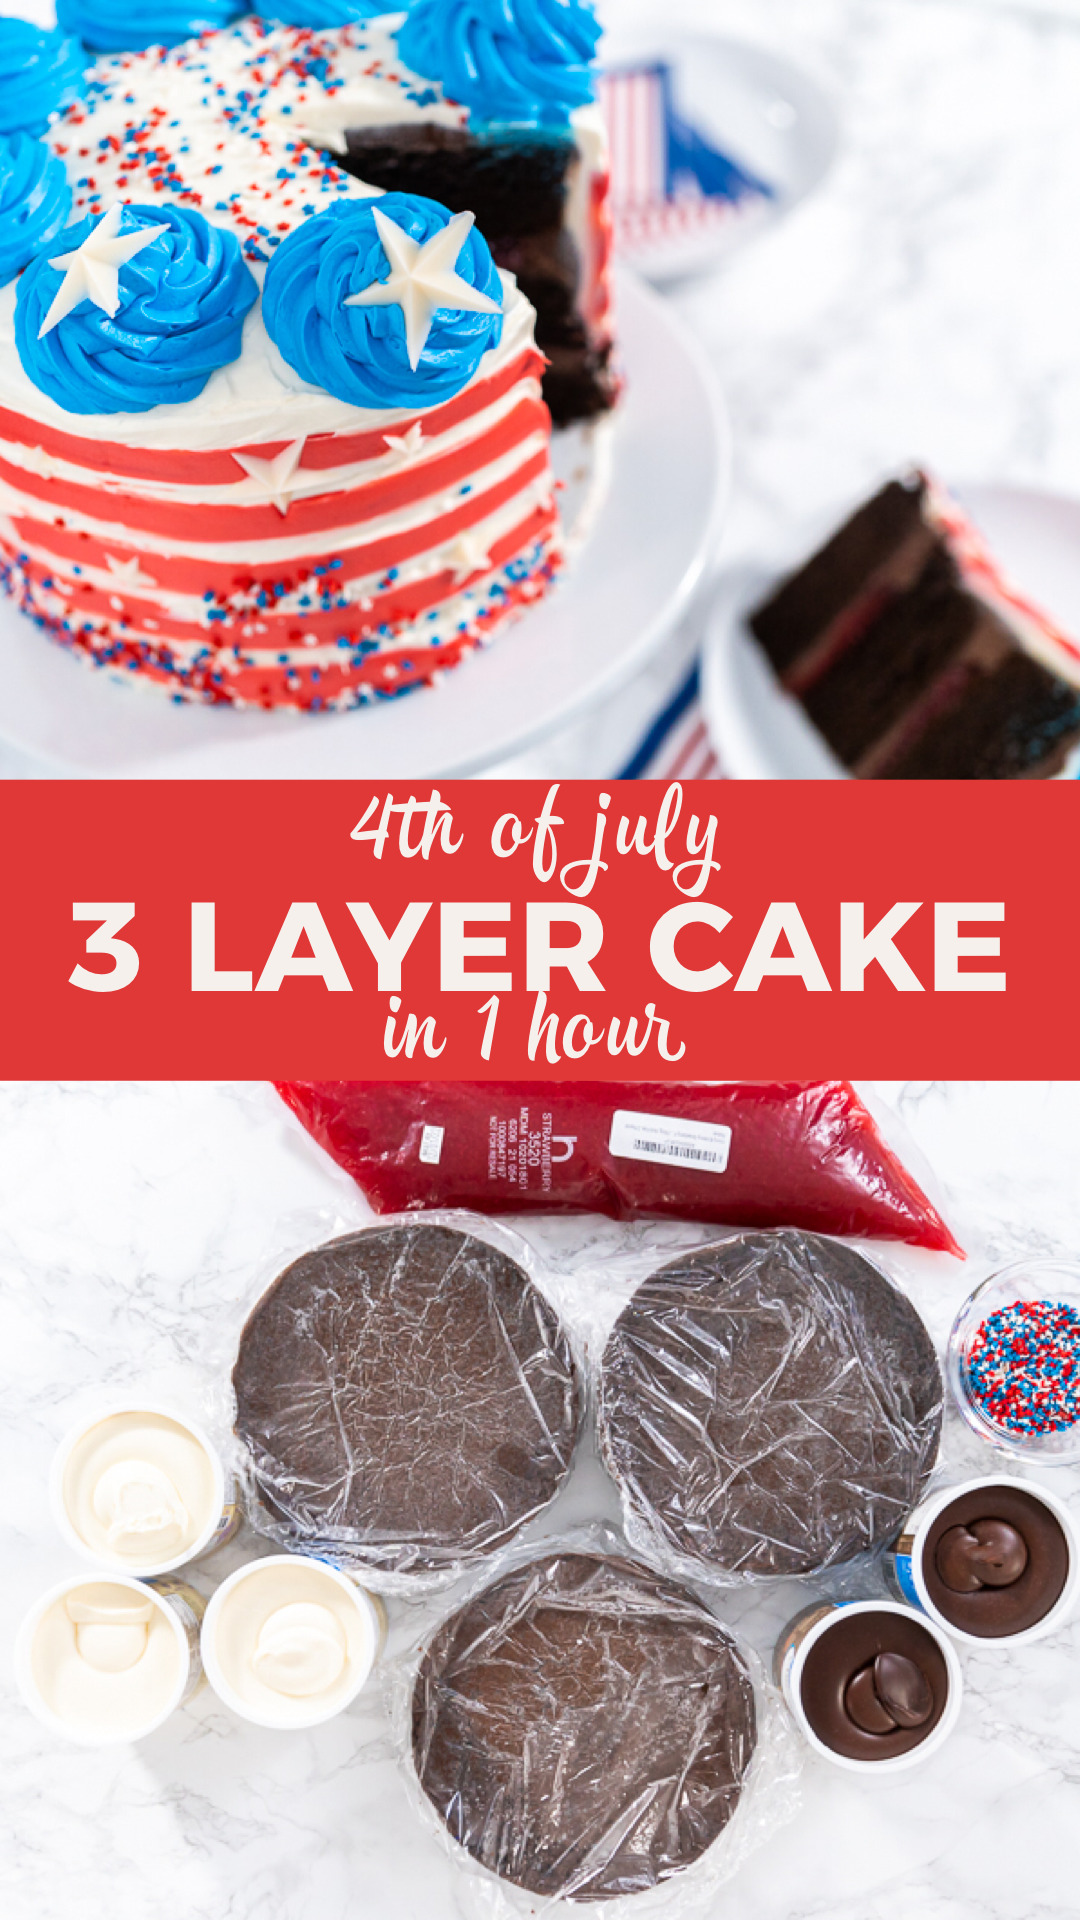 4th of July 3 layer cake in 1 hour